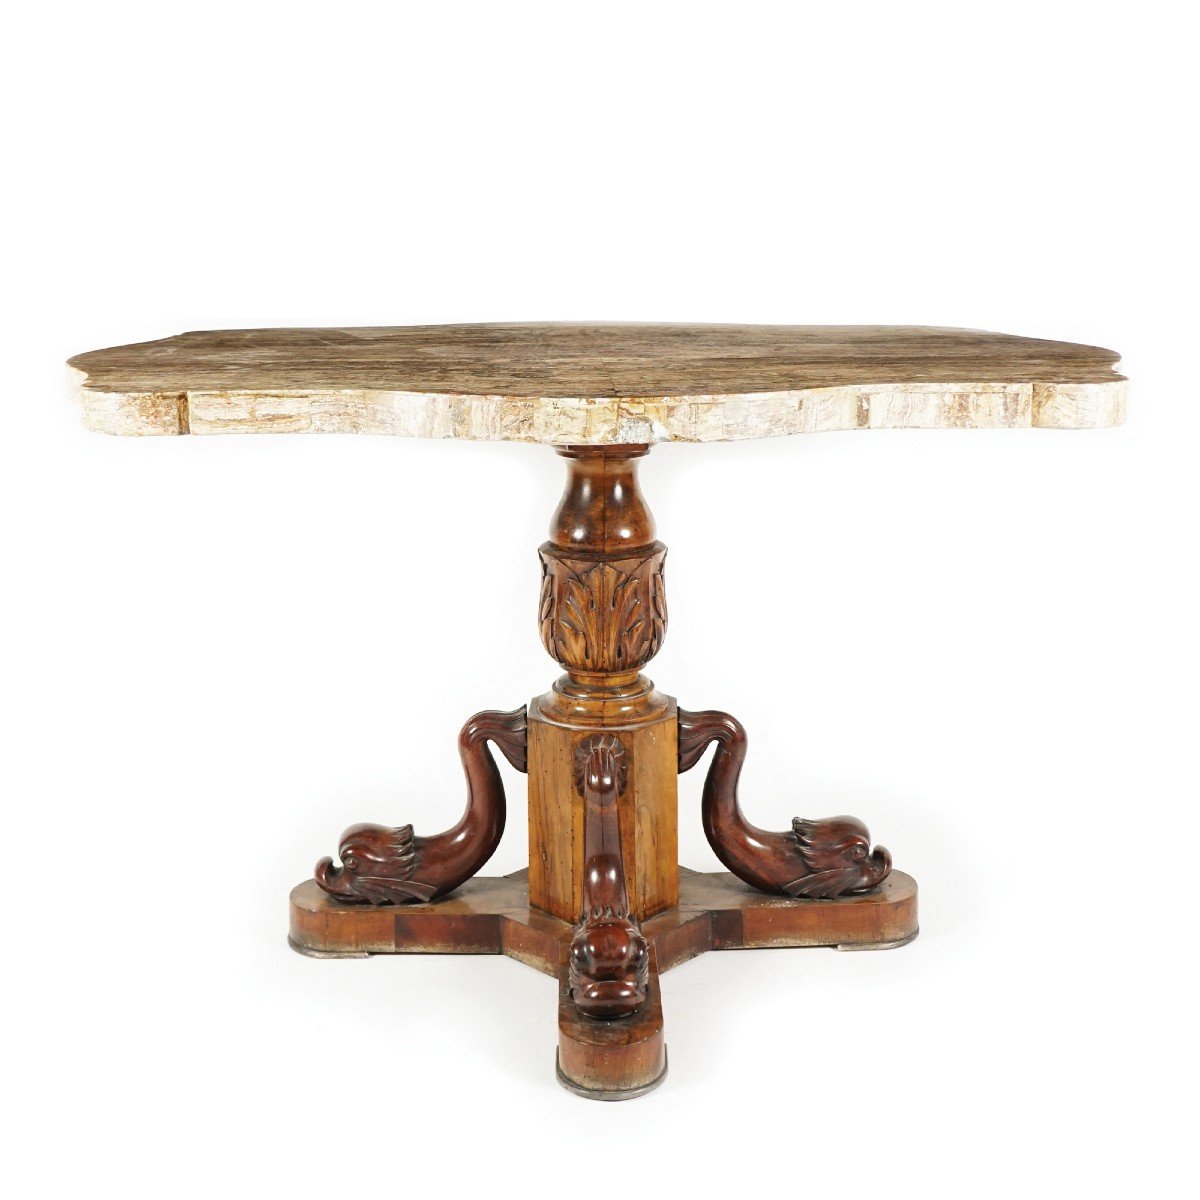 Center Console Table With Marble Top Plated In Tivoli Onyx